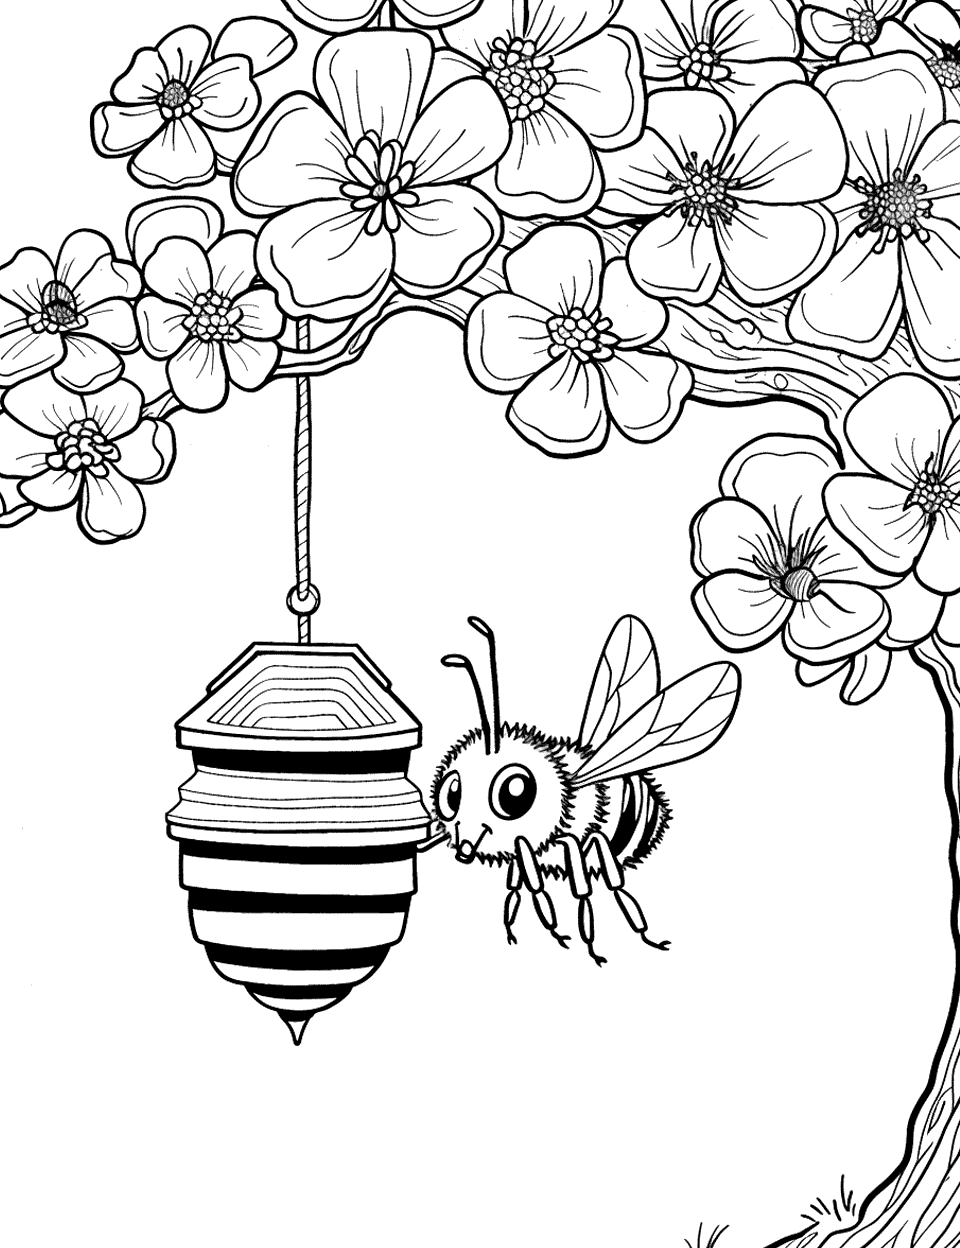 Bee and Beehive Under Tree Coloring Page - A beehive hanging from a tree branch with a bee flying nearby.